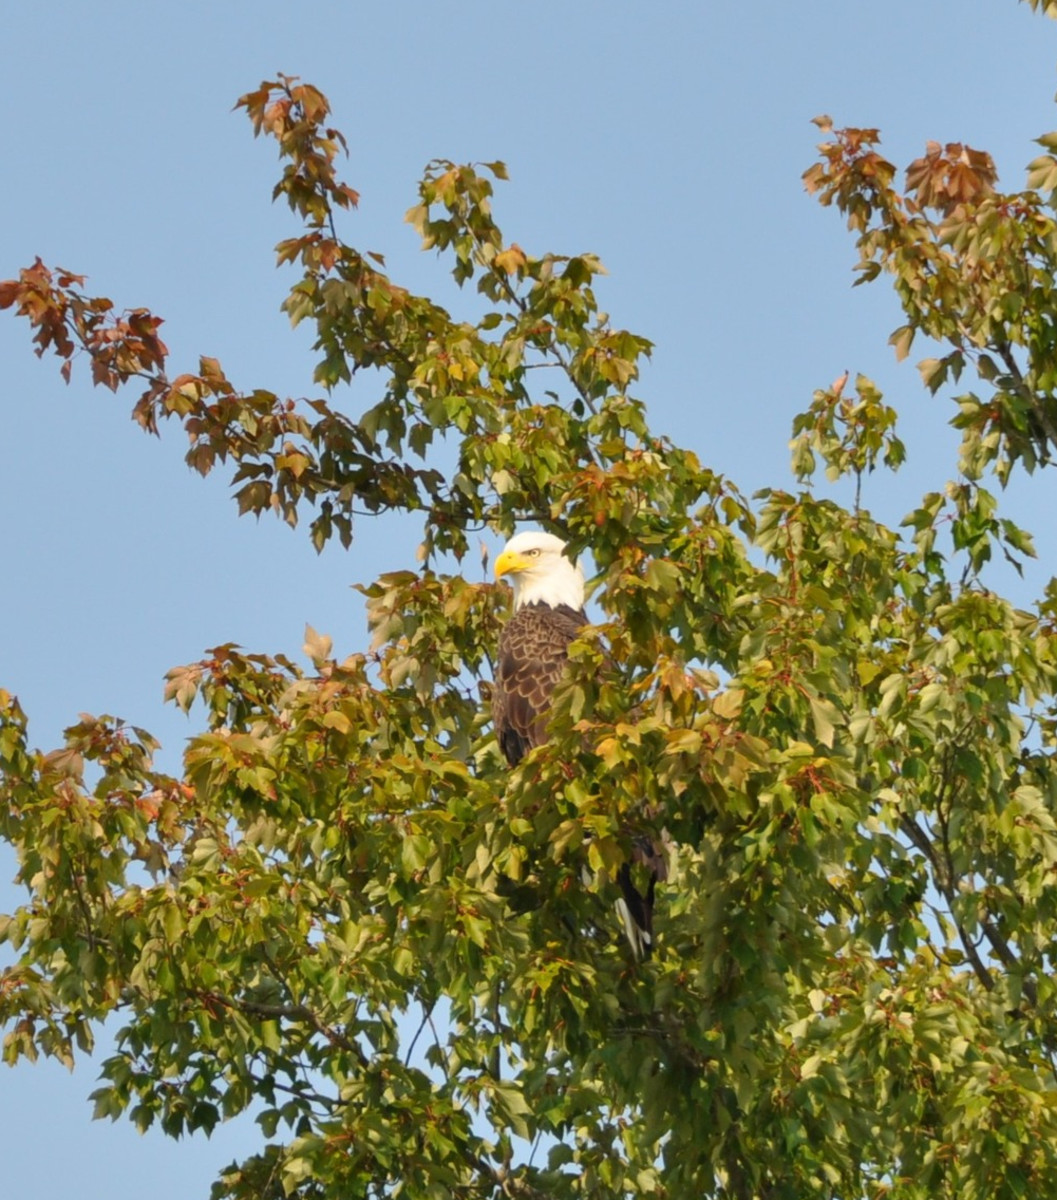 How to Identify Bald Eagles by Wing Pattern